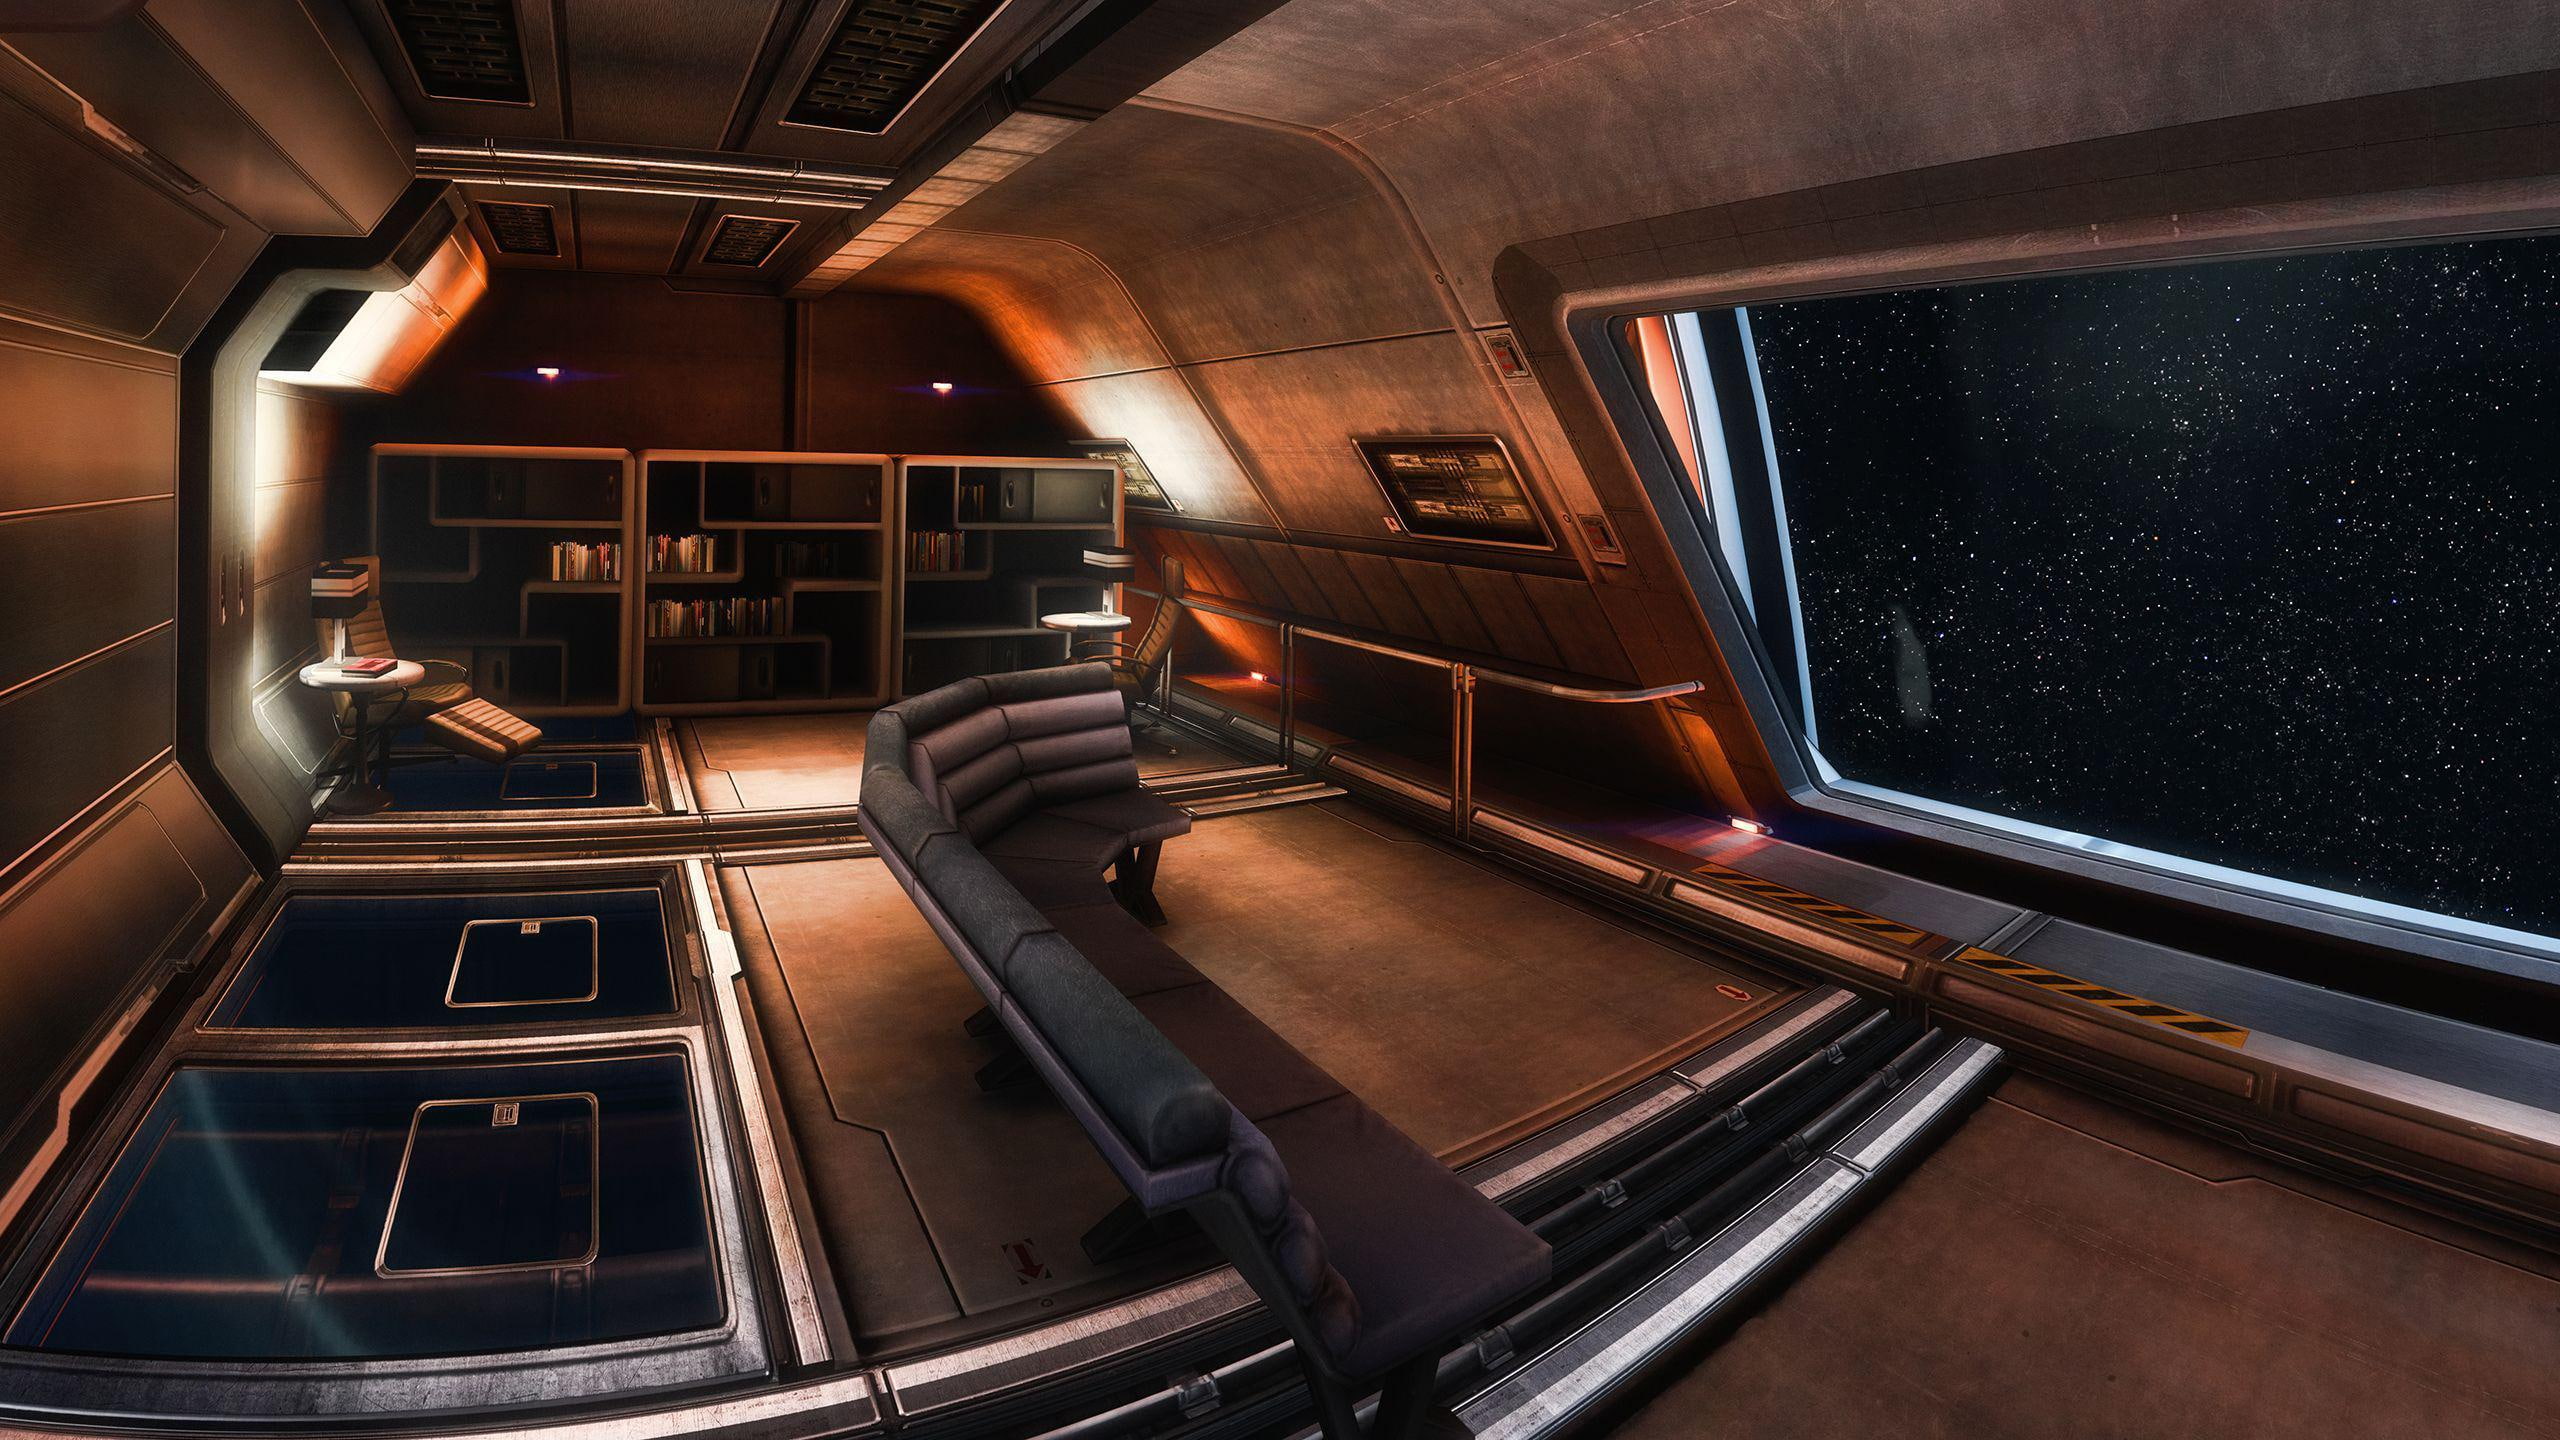 Normandy - Mass Effect, space ship interior, games, 2560x1440